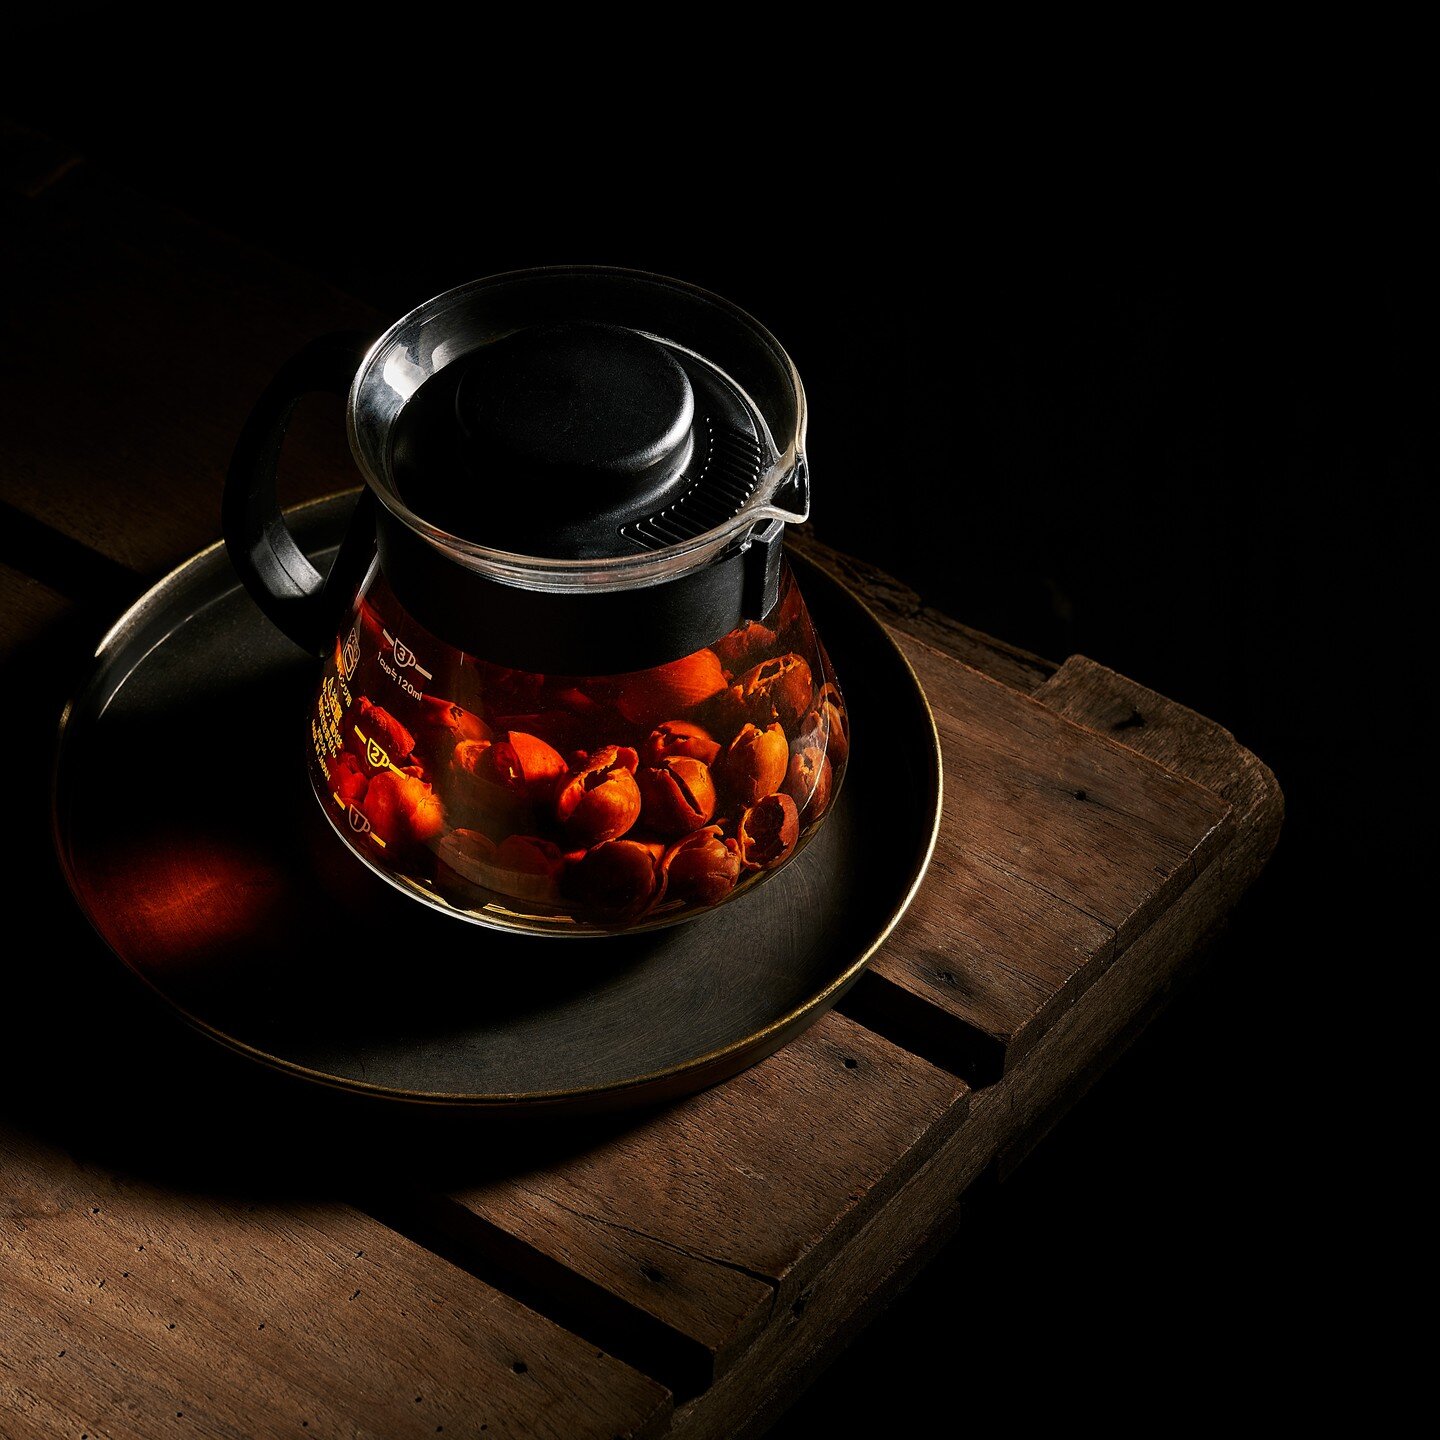 While the coffee bean gets all the love, its mom, Cascara, gets far less shine. Cascara - literally meaning husk or peel in Spanish, is the cherry that surrounds each coffee bean pair. Brewed as a tea, it has less caffeine and has a taste somewhat re